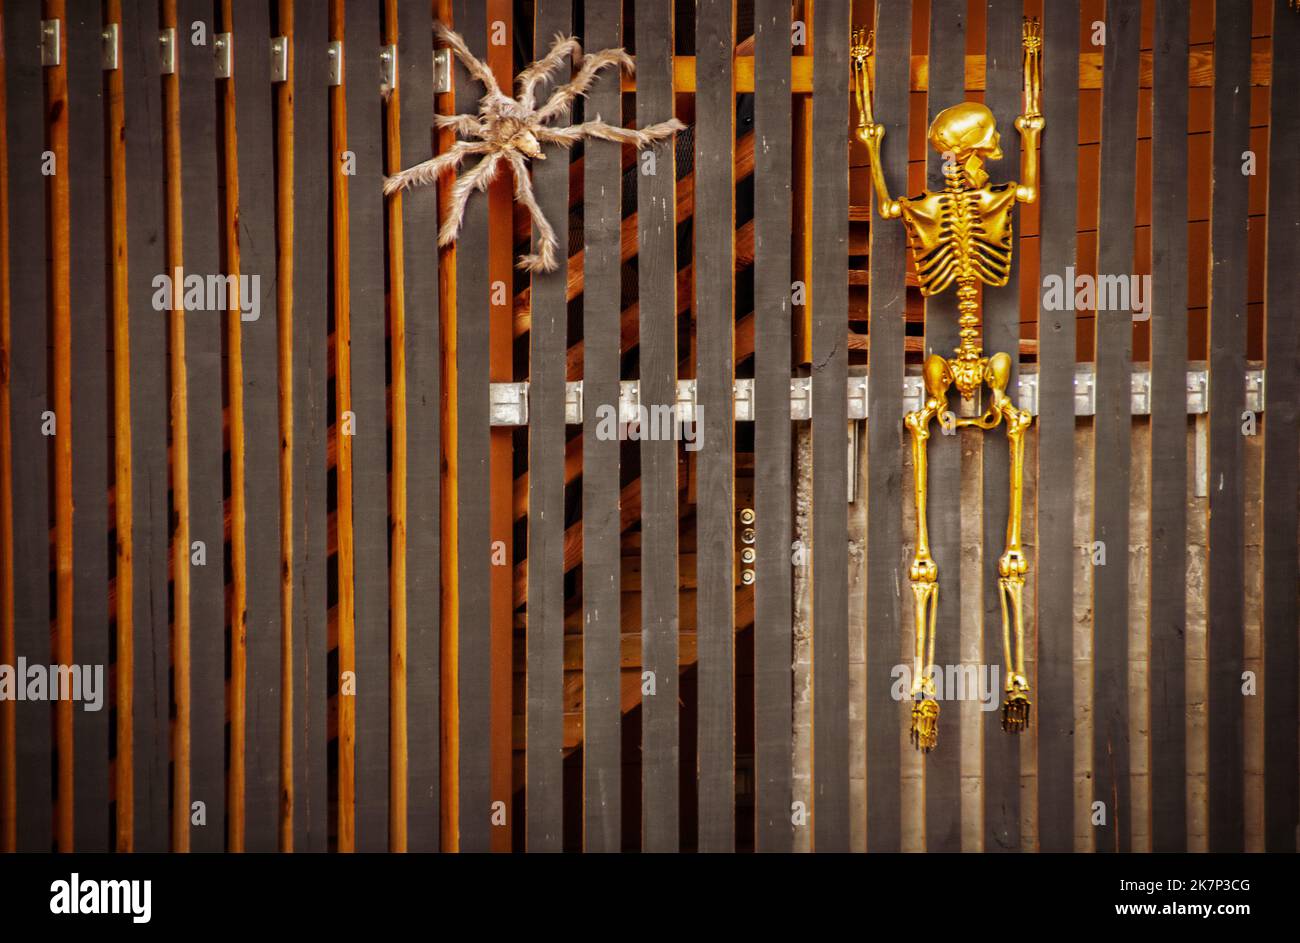 Golden Halloween skeleton decoration and fuzzy spider climbing contemporary rustic residential fence - Room for copy Stock Photo